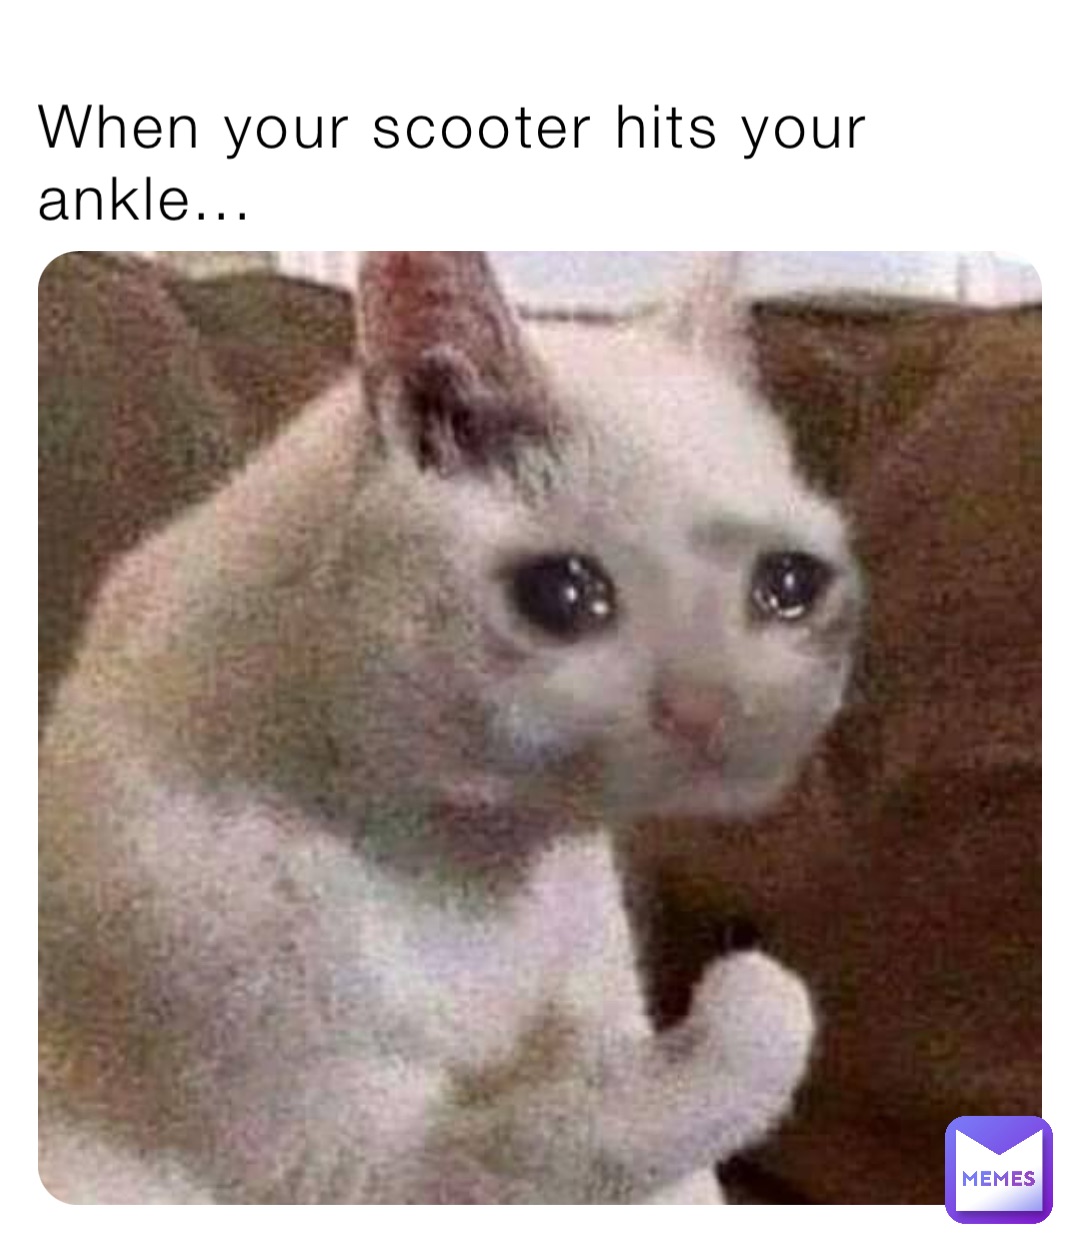 When your scooter hits your ankle...